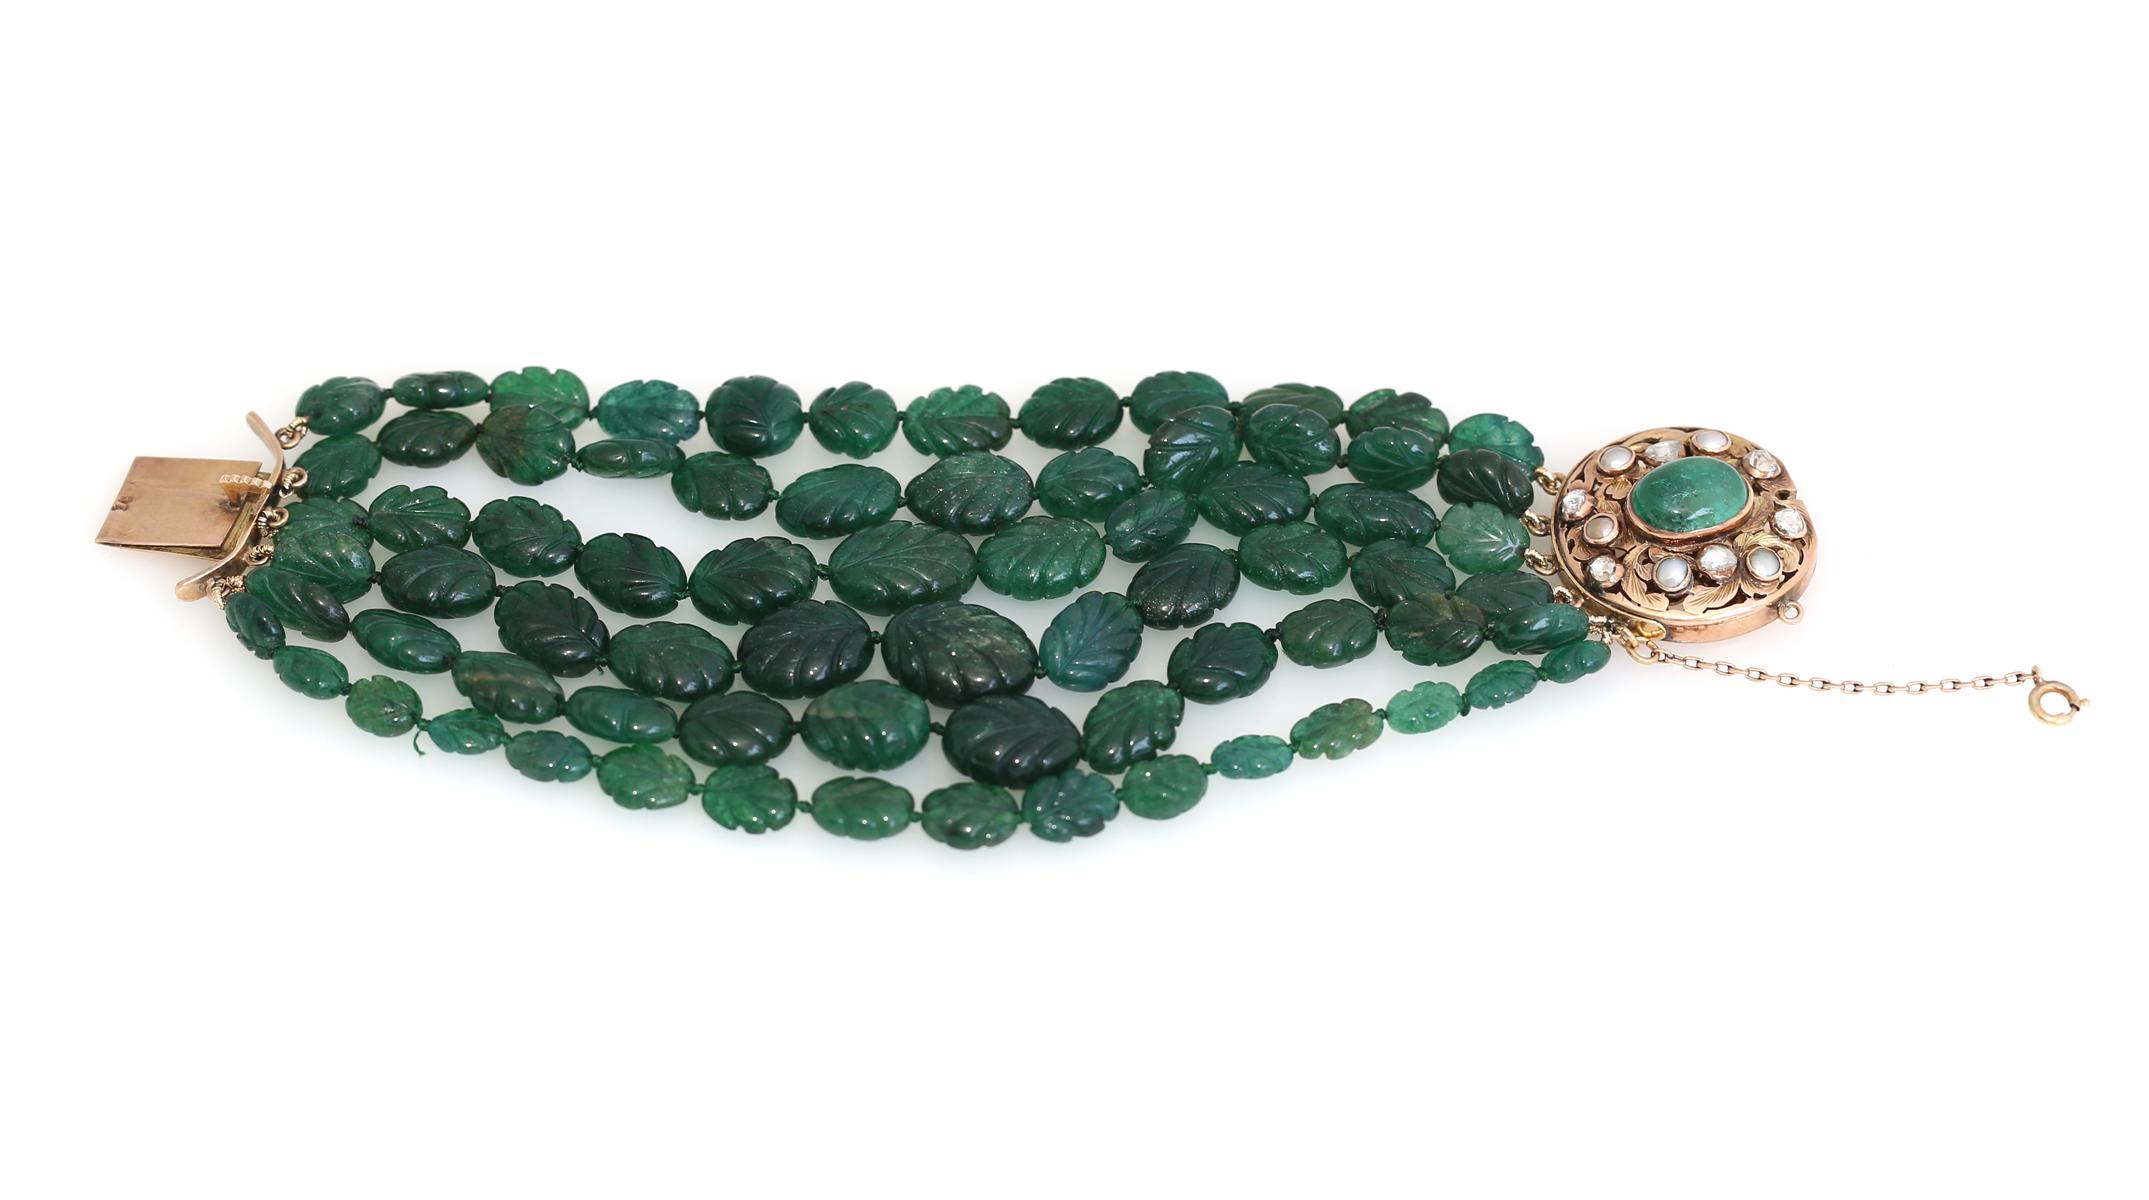 Carved Emeralds Rose-Cut Diamonds Bracelet, 1900

Antique bracelet with natural untreated Emeralds weighing approximately 350Ct. Each Emerald is carved, creating a leaf-like ornament. Much later, the world-famous Cartier Jewelry house would apply